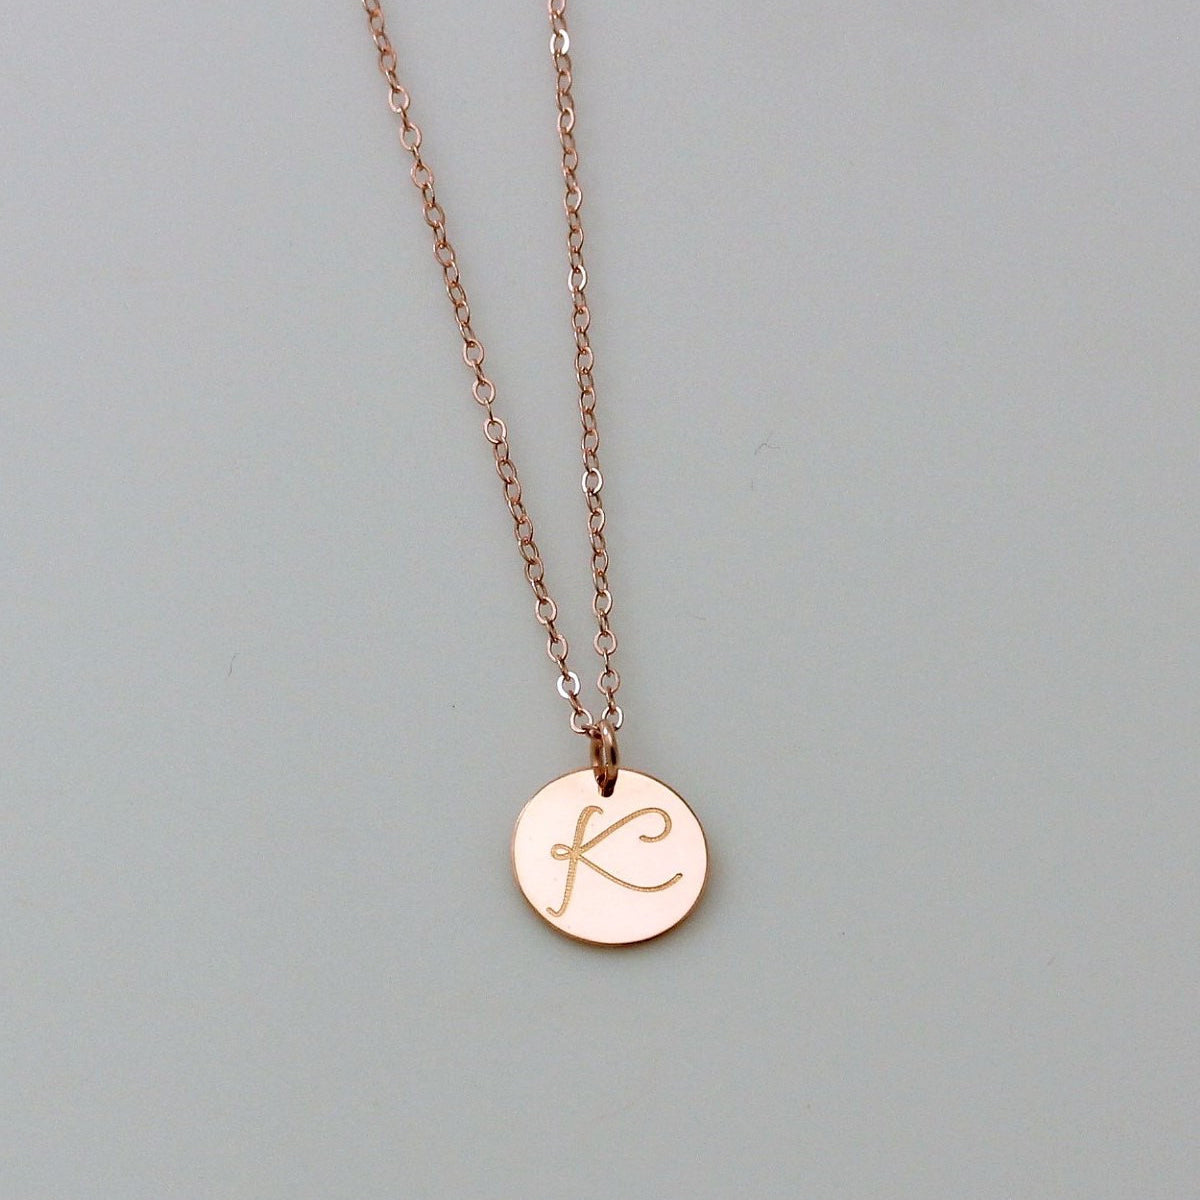 Personalized Circle Charm Necklace - Shop FoR Personalized Circle Charm ...